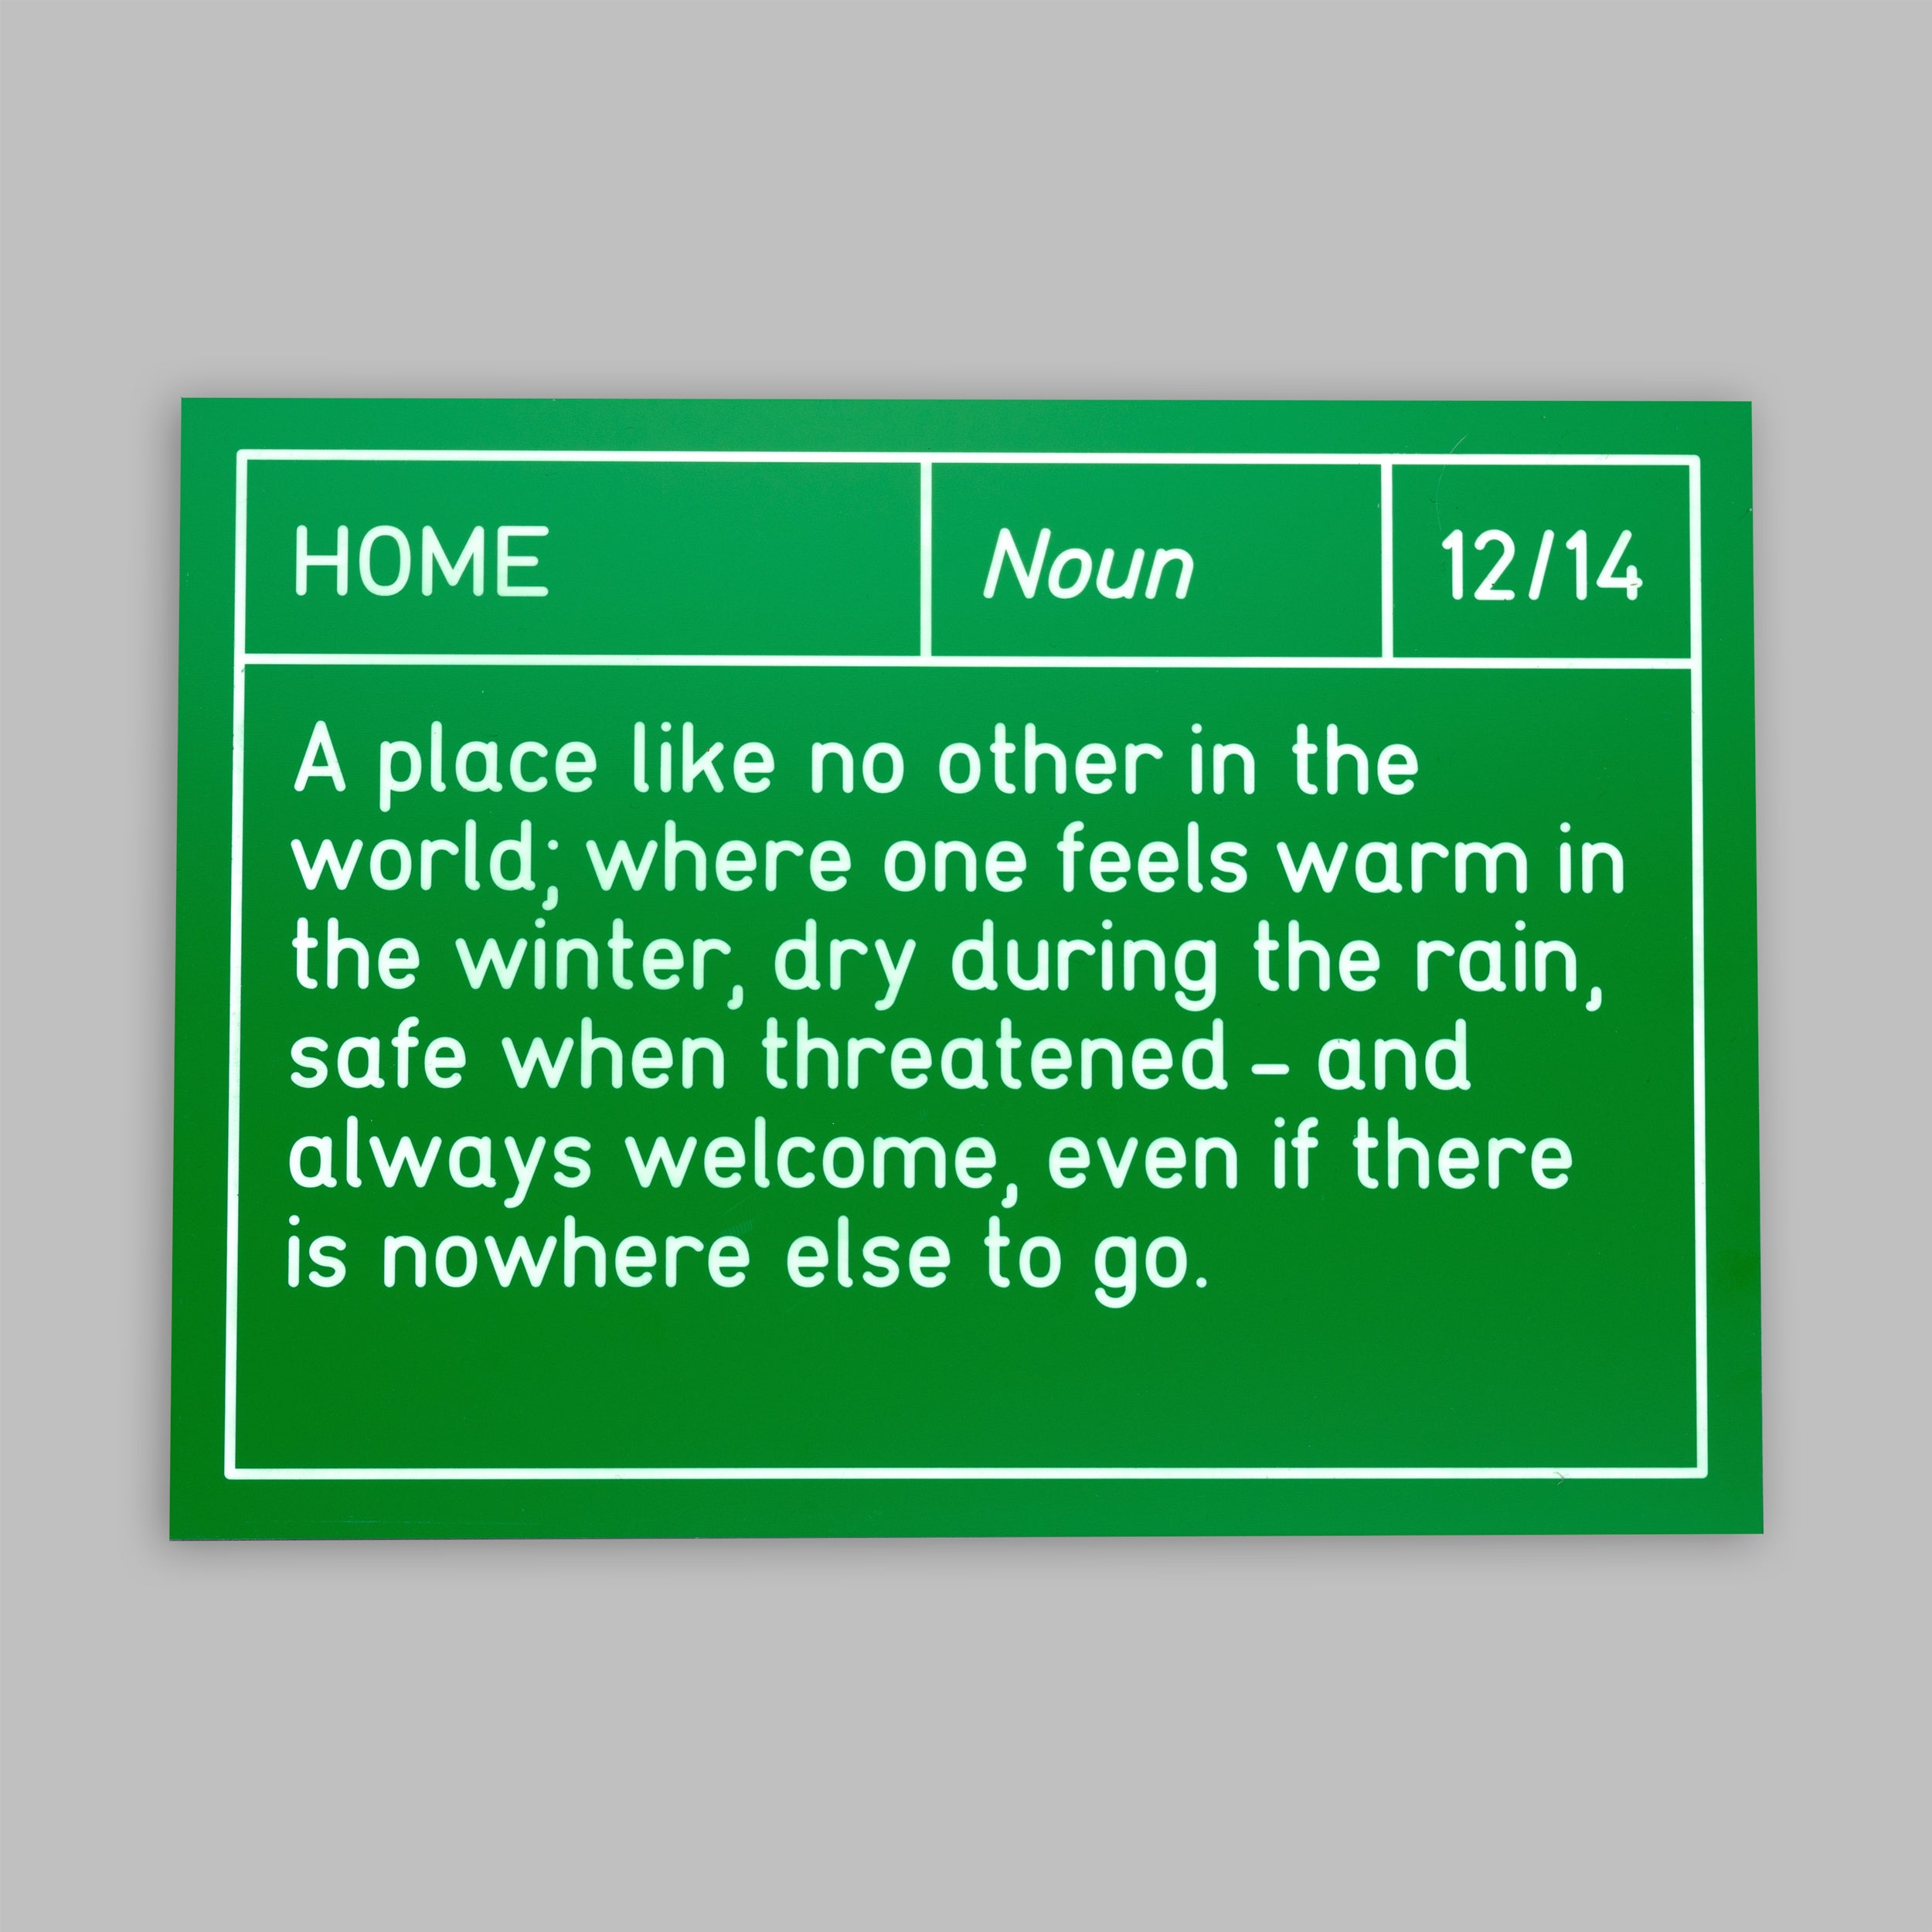 Home - Sign 12/14